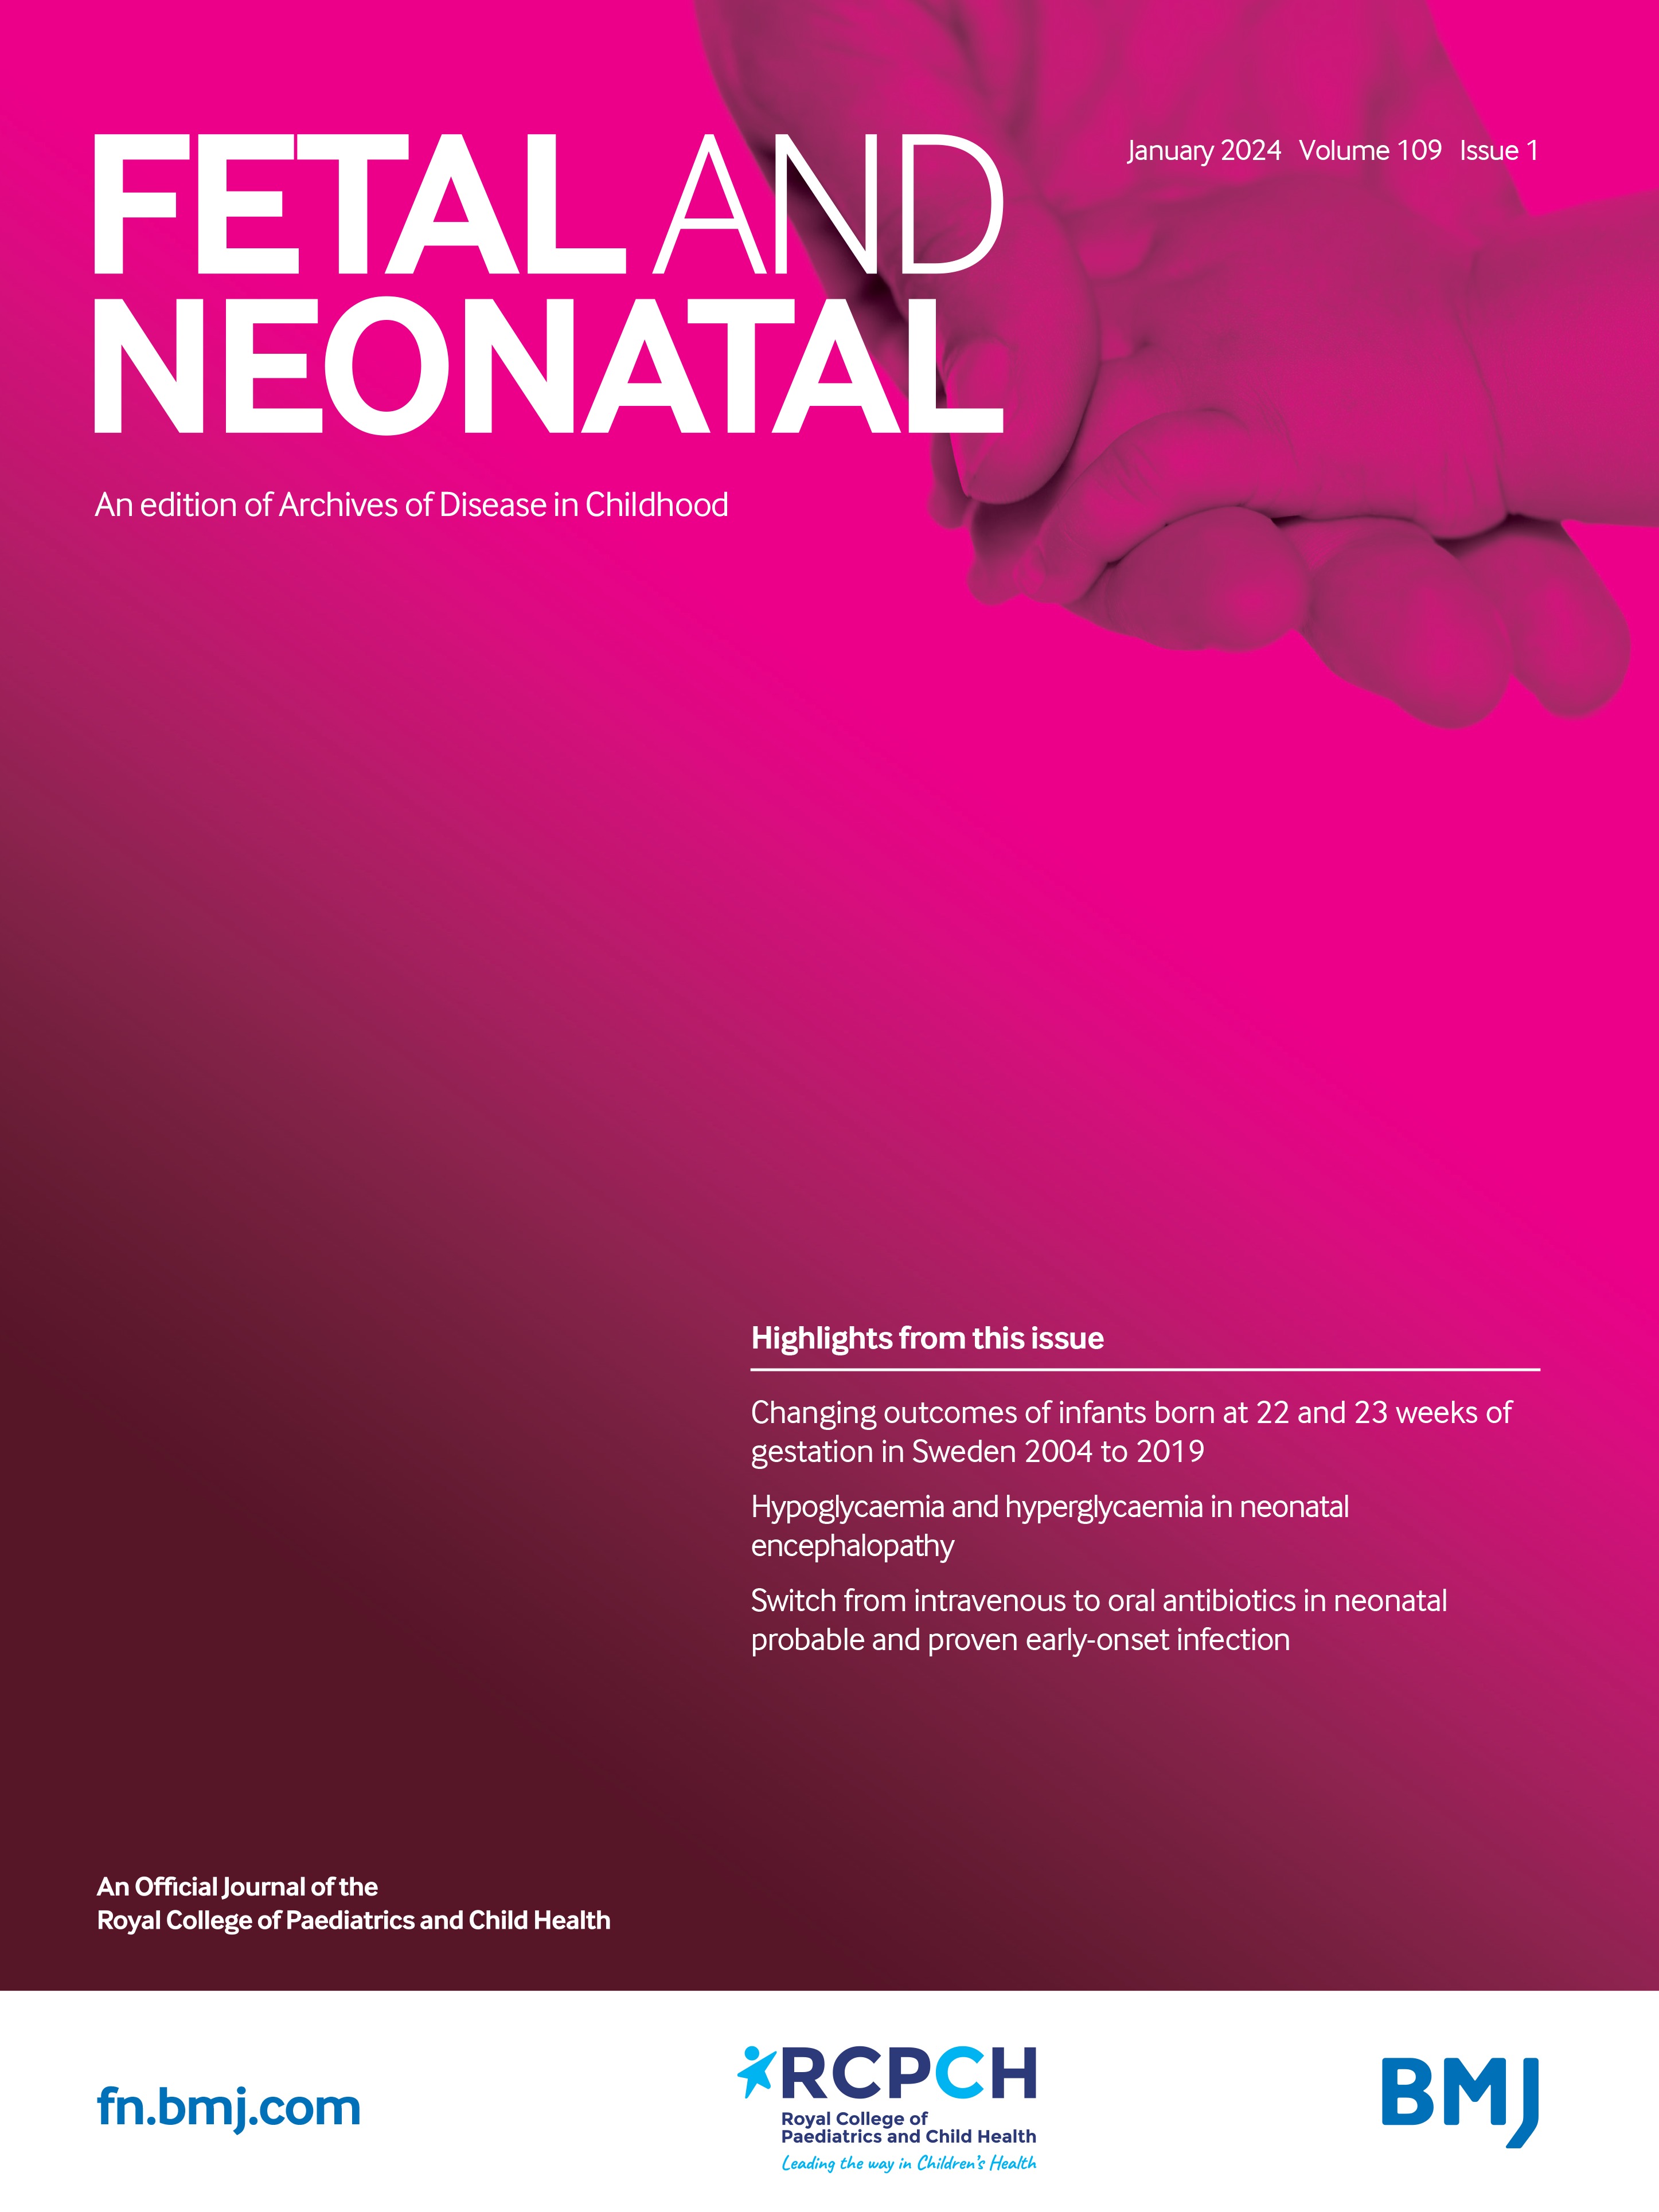 Predictive performance of multiple organ dysfunction in asphyxiated newborns treated with therapeutic hypothermia on 24-month outcome: a cohort study